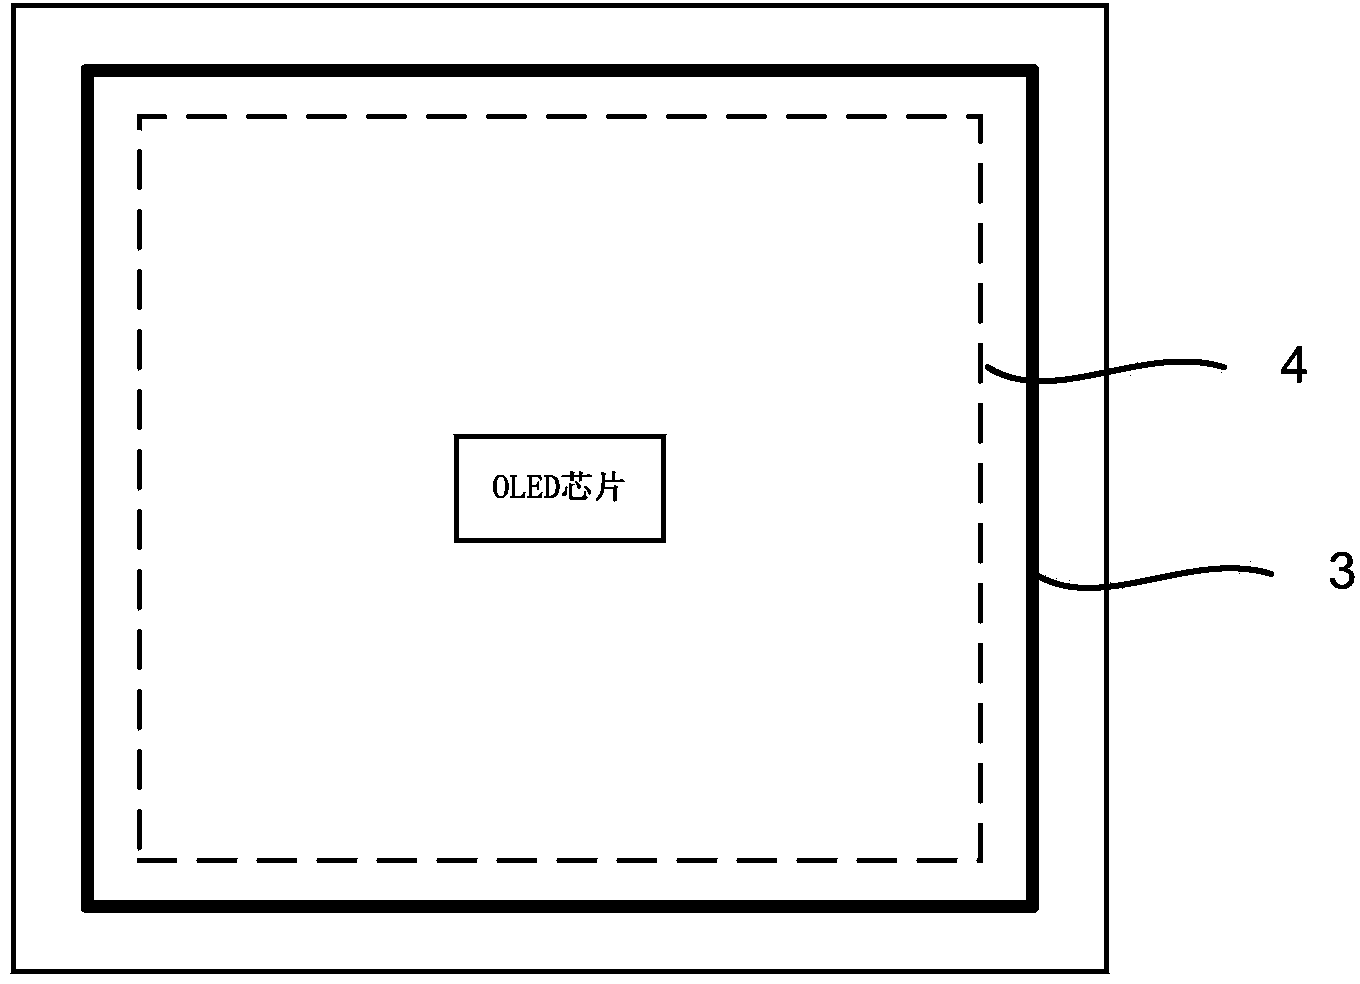 OLED (organic light emitting diode) packaging structure